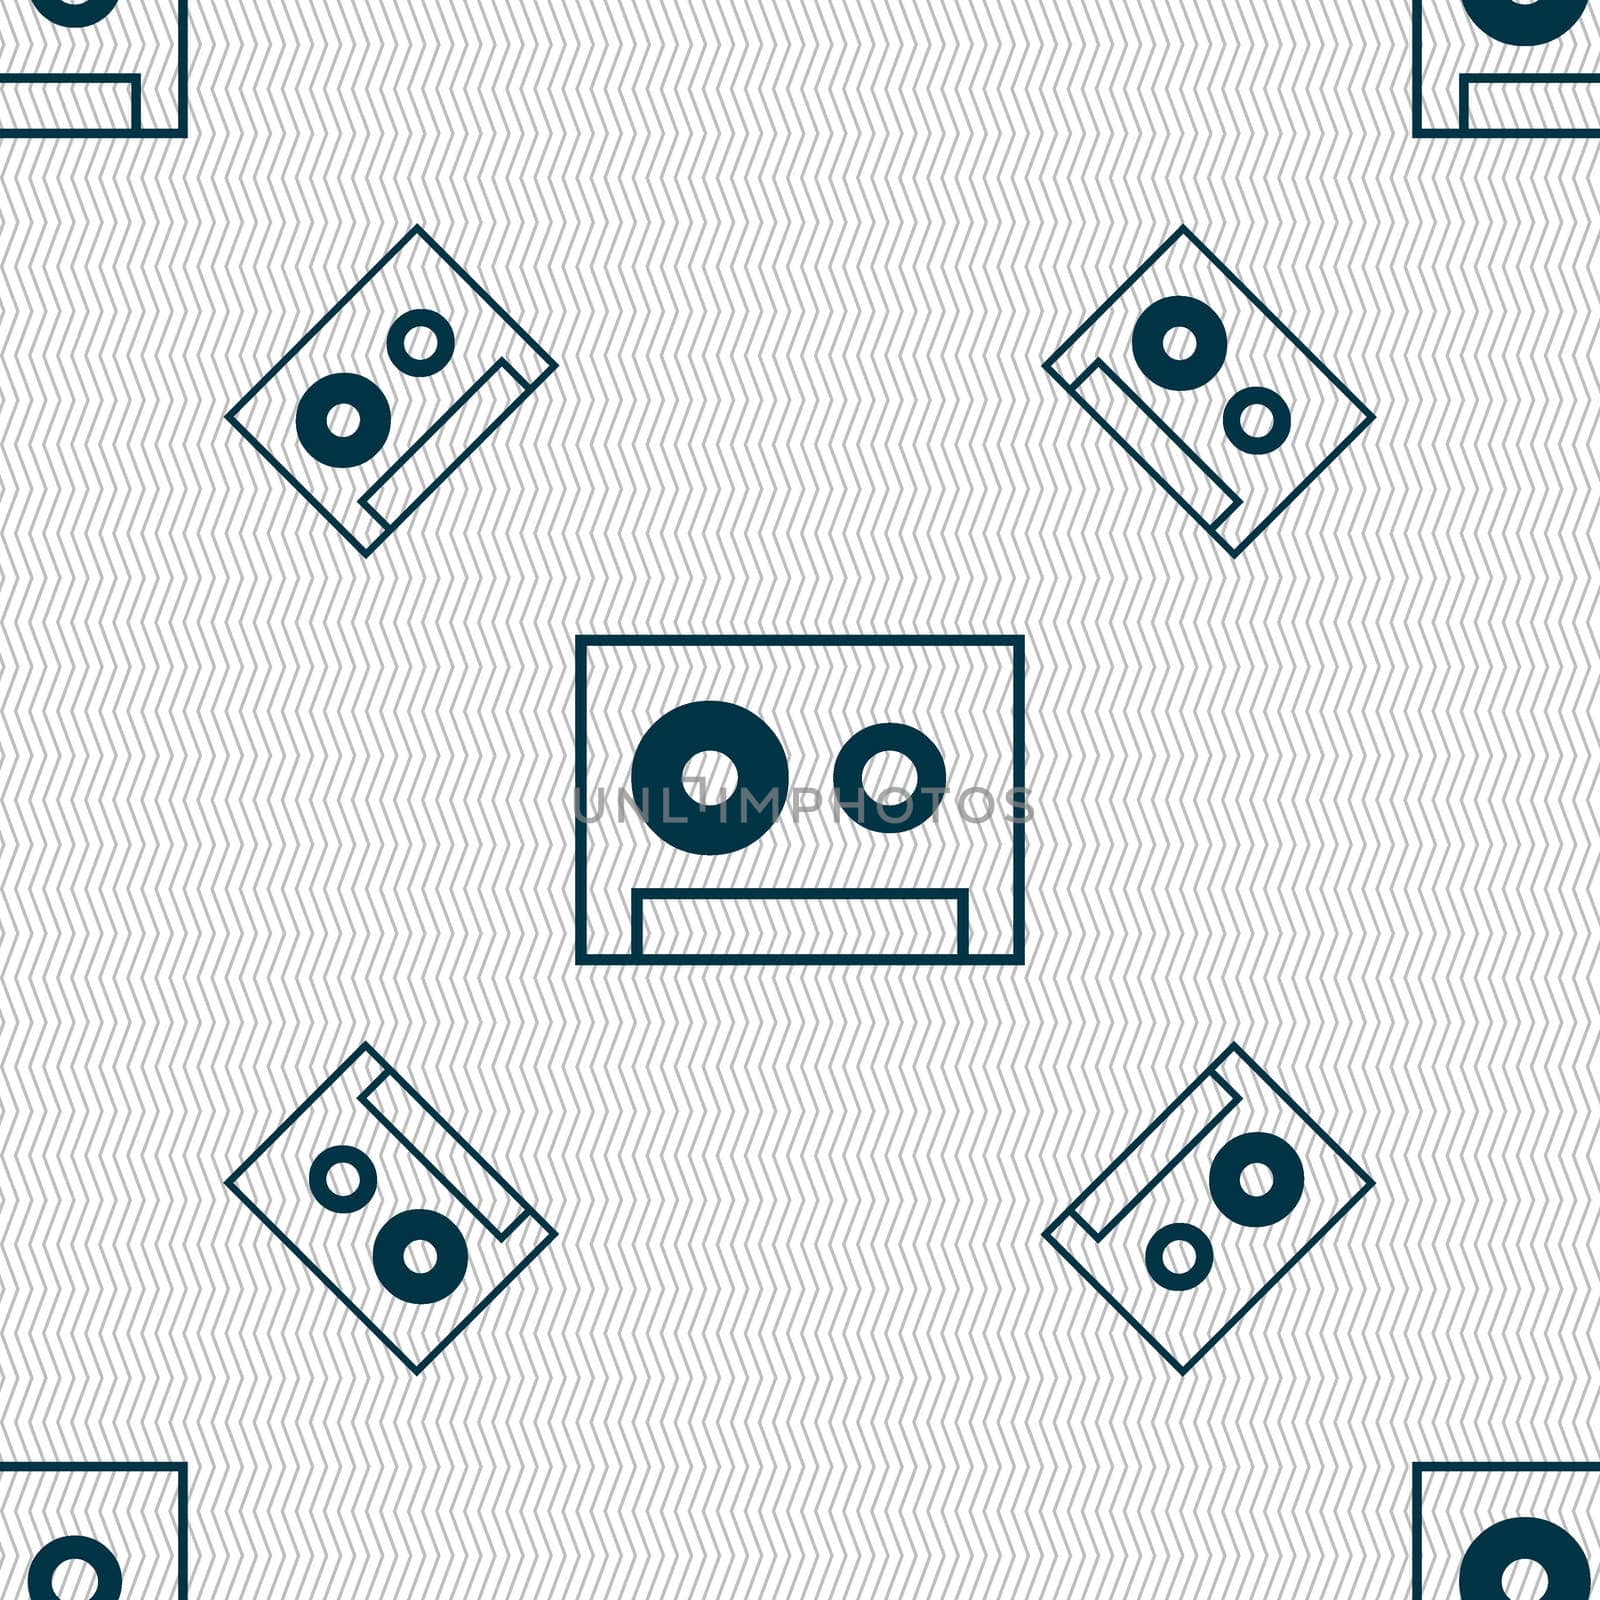 cassette sign icon. Audiocassette symbol. Seamless pattern with geometric texture. illustration